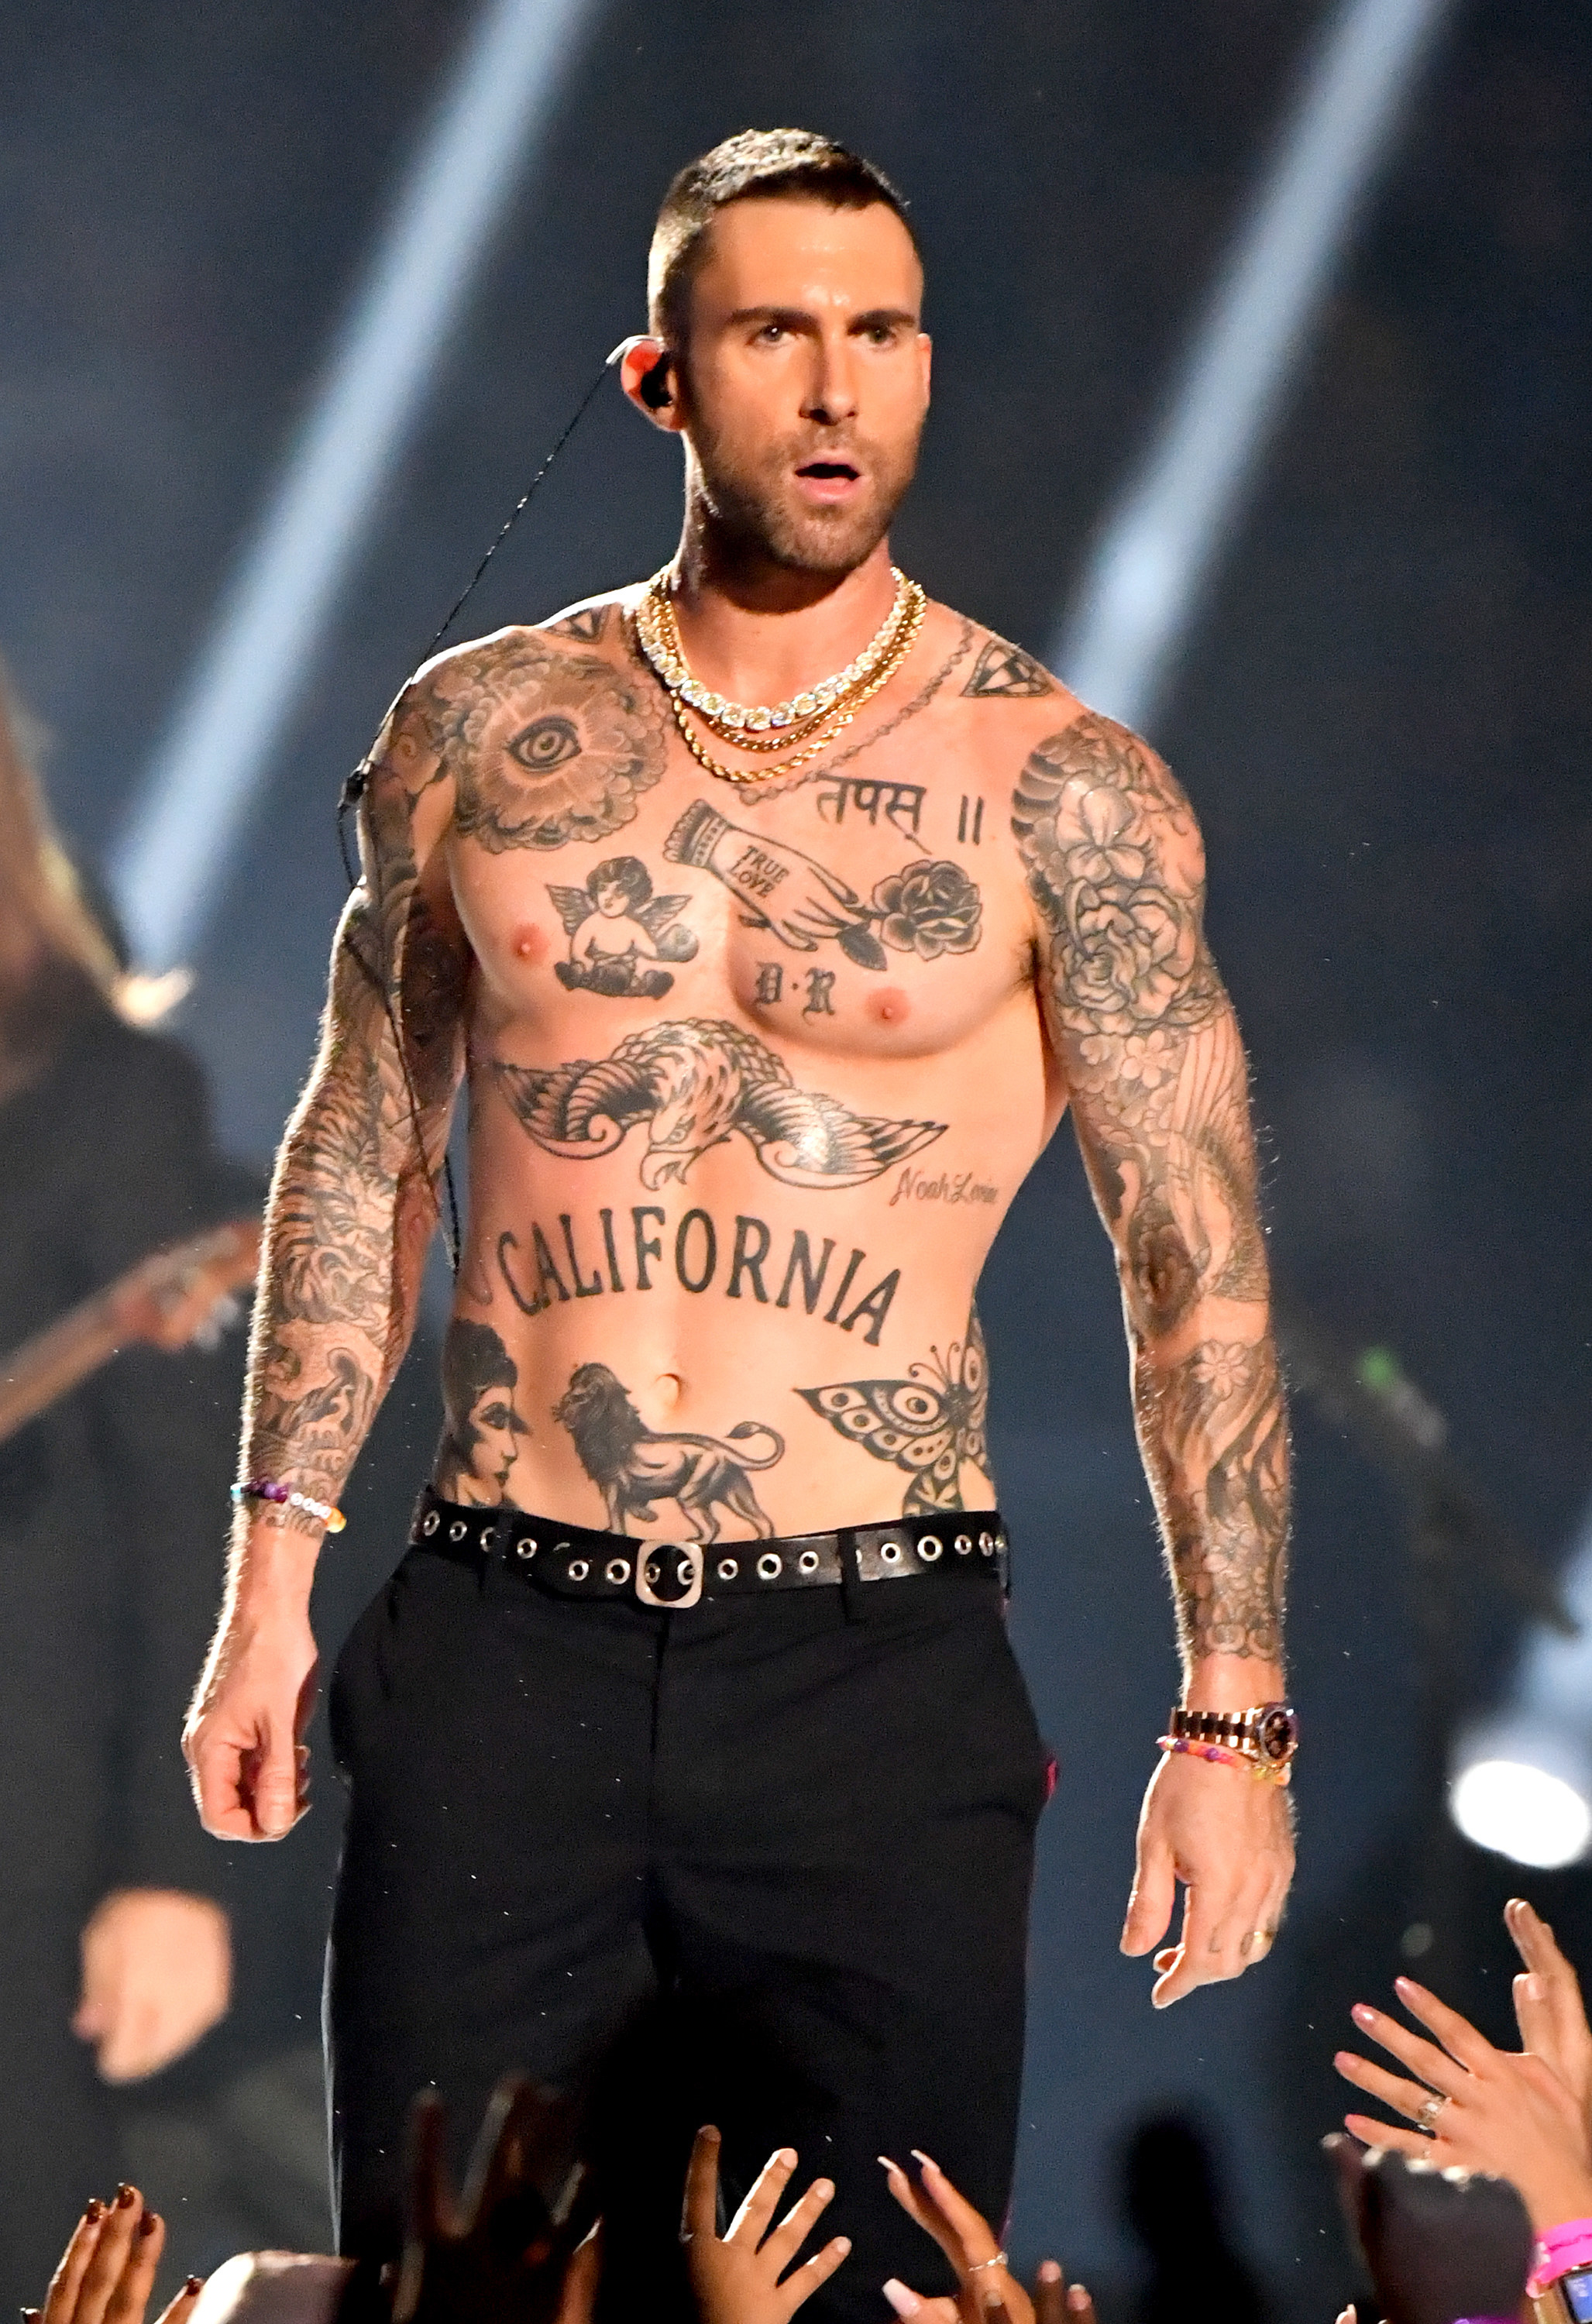 Maroon 5 star Adam Levine got a new face tattoo and its as hot as him   Entertainment News